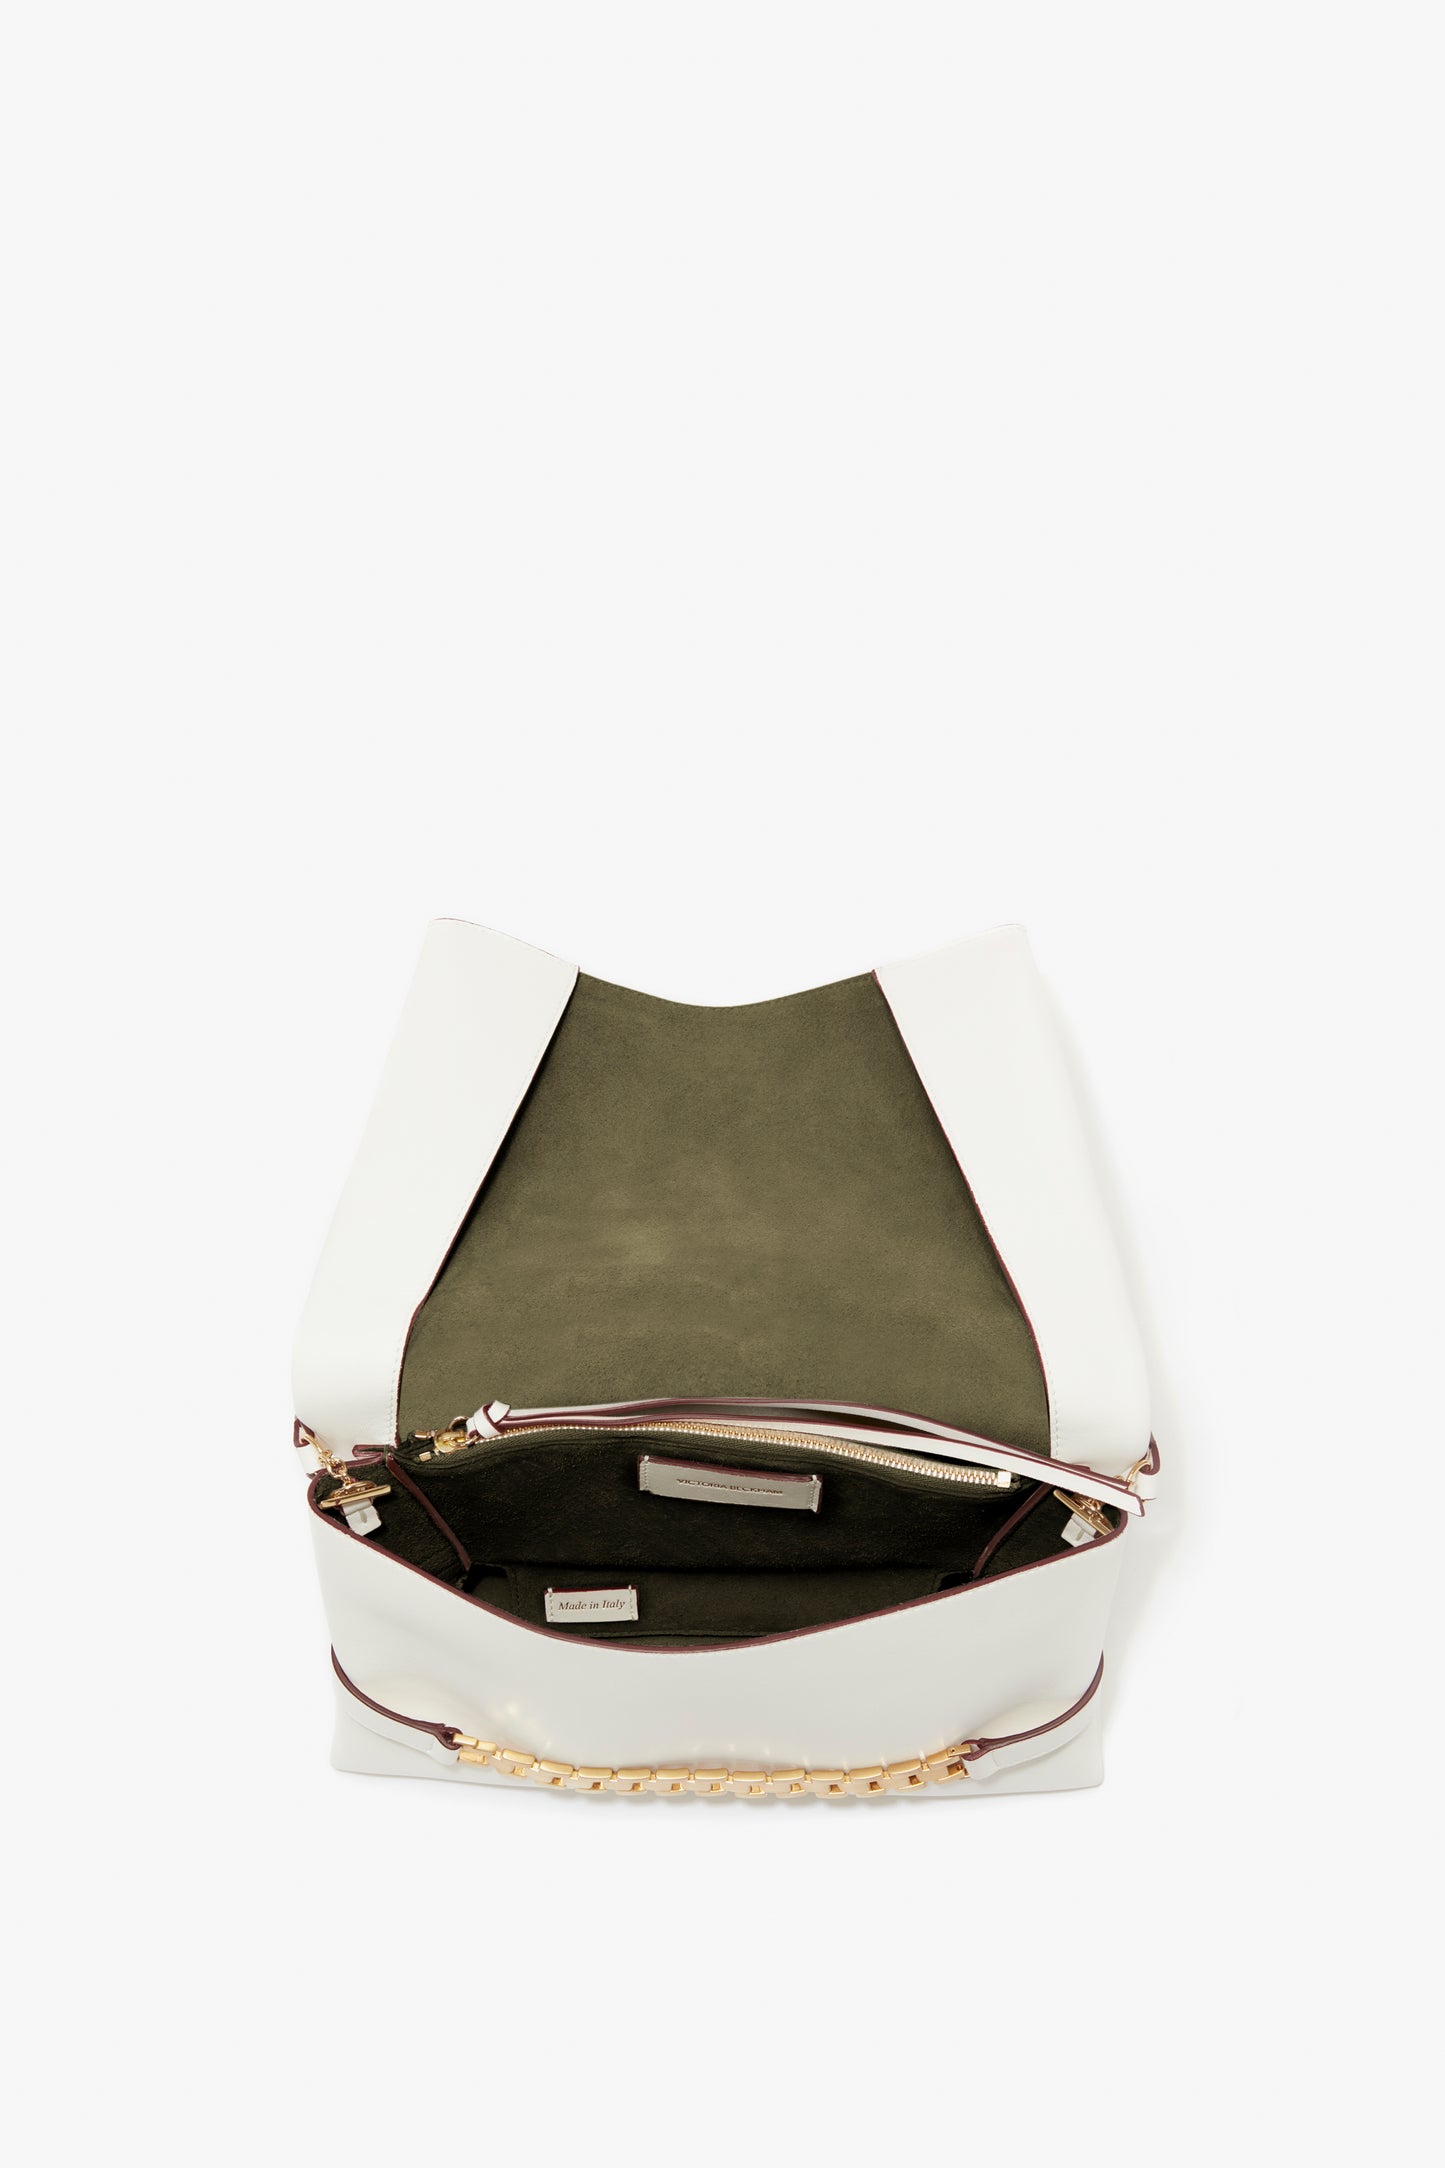 An open Victoria Beckham Chain Pouch with Strap in white leather, showing a green interior and a zippered compartment.